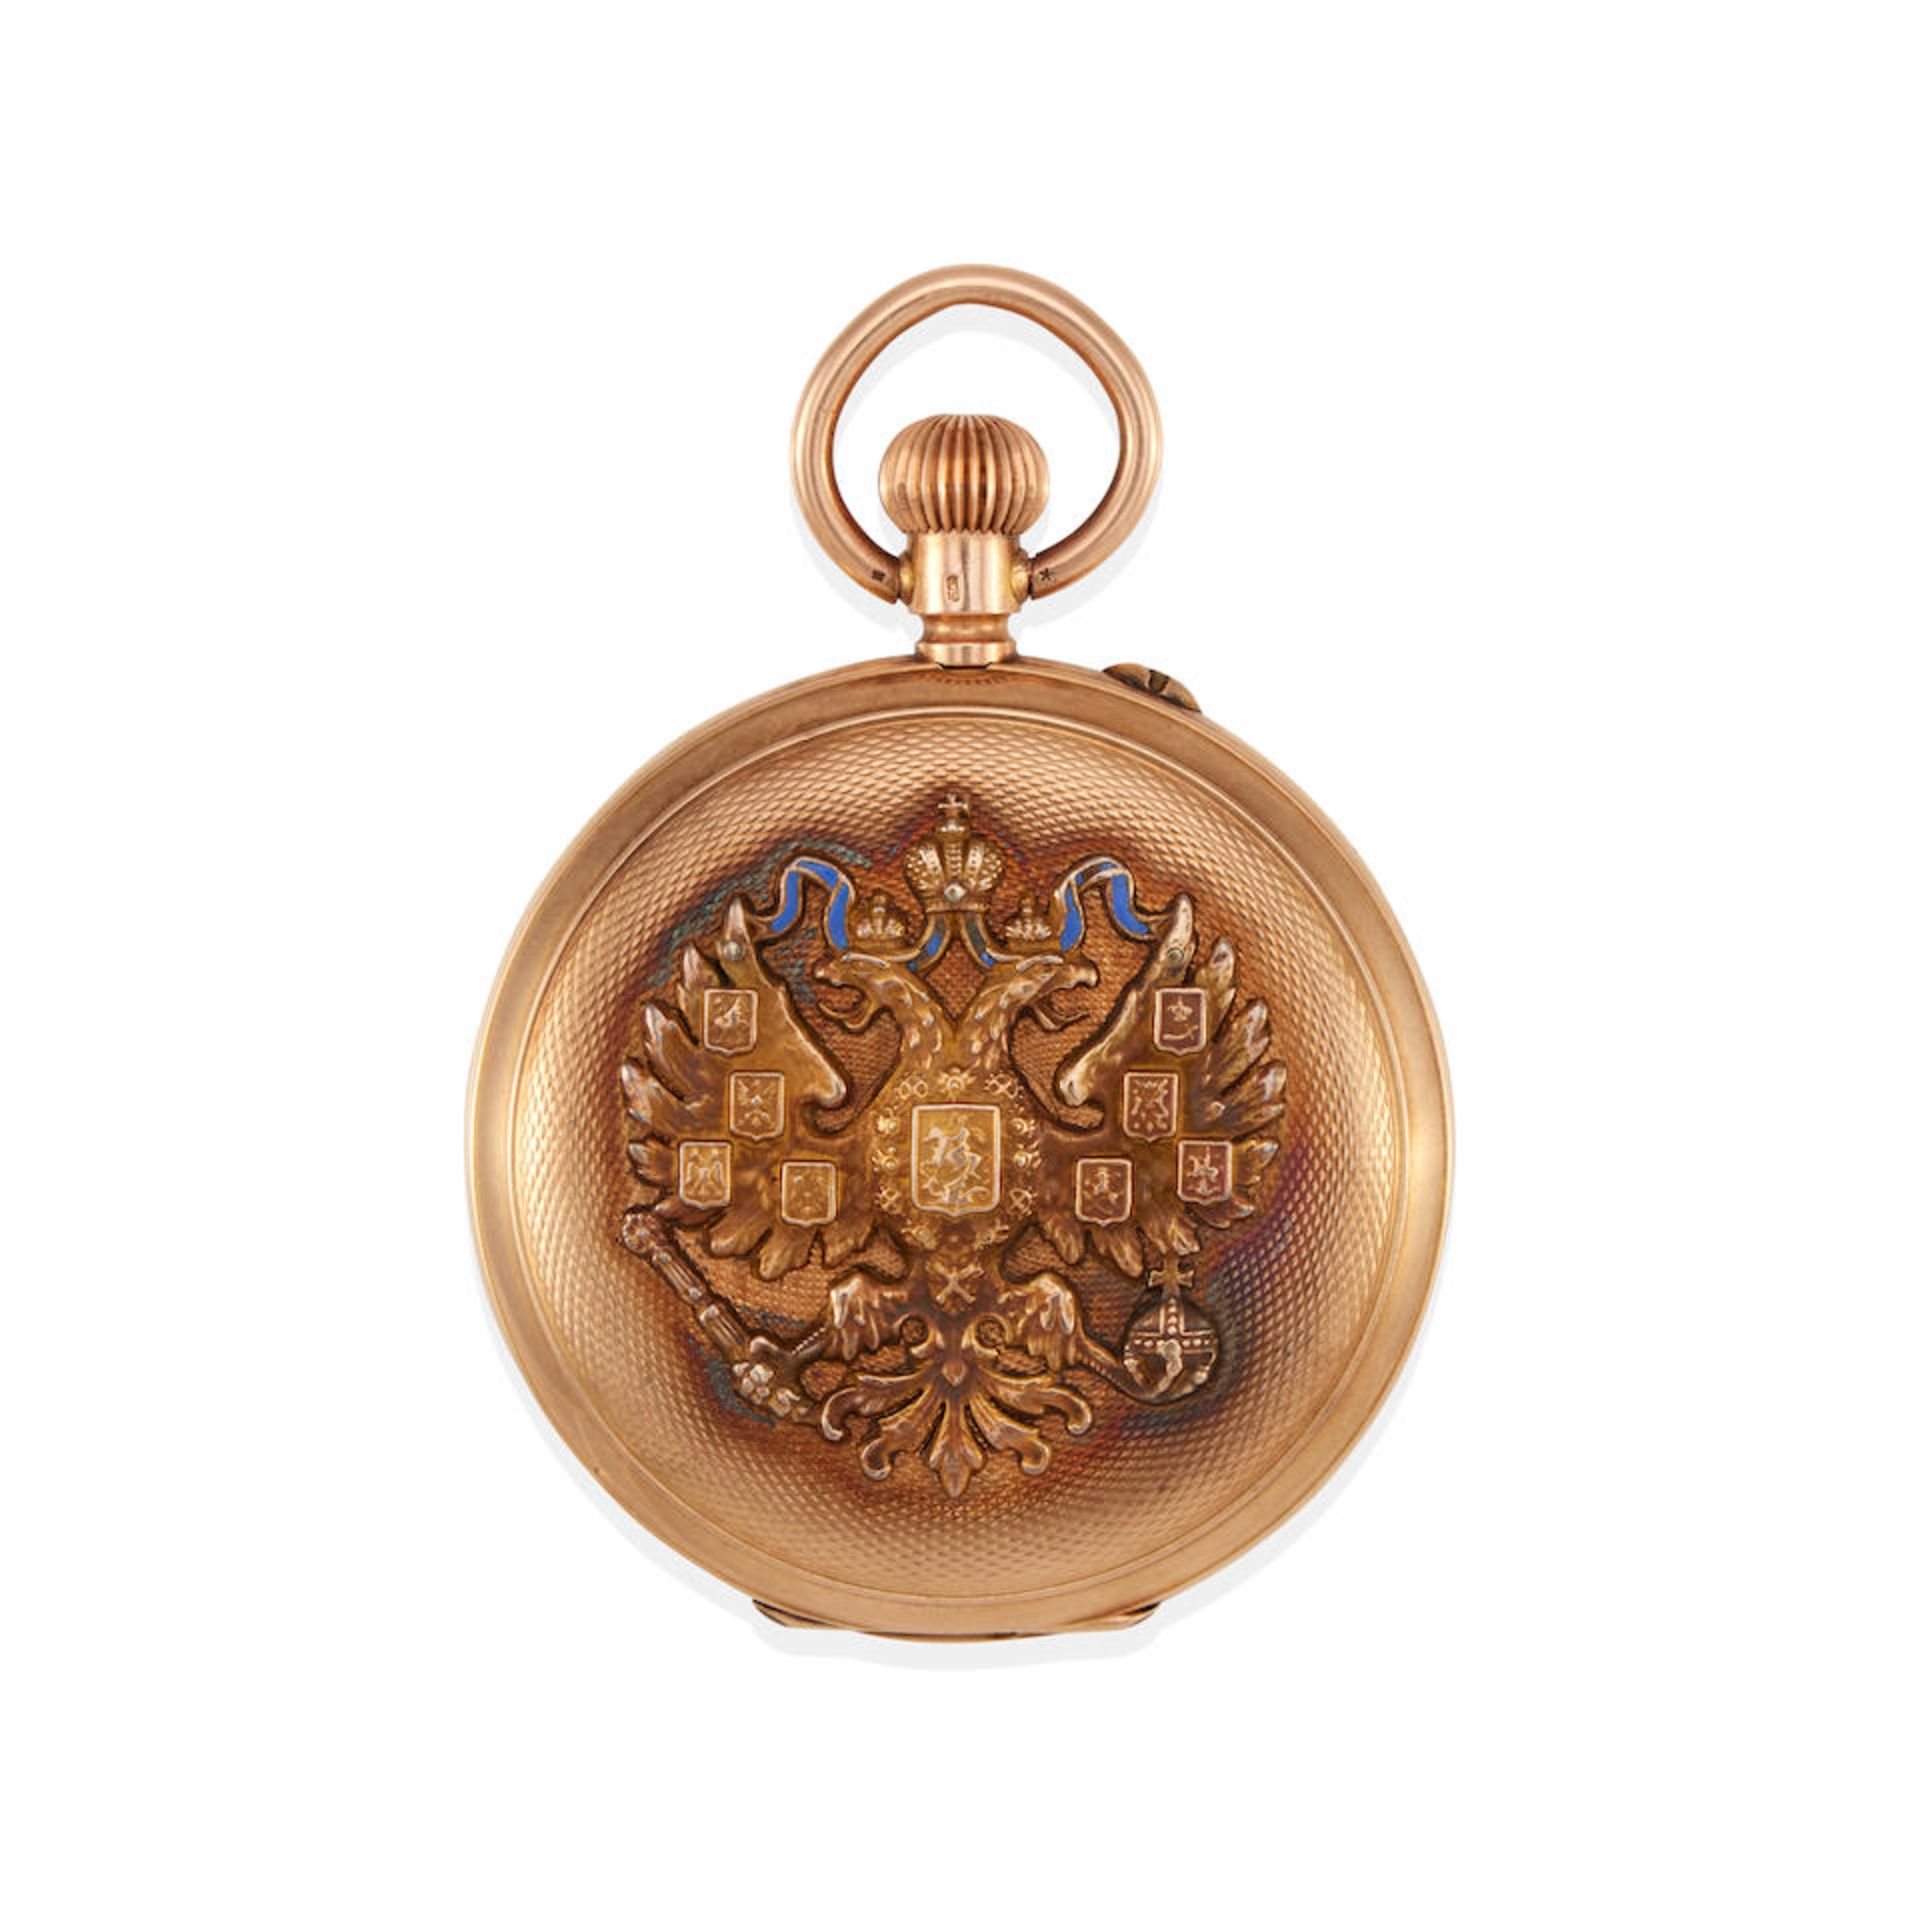 A 14K GOLD AND BLUE ENAMEL POCKET WATCH